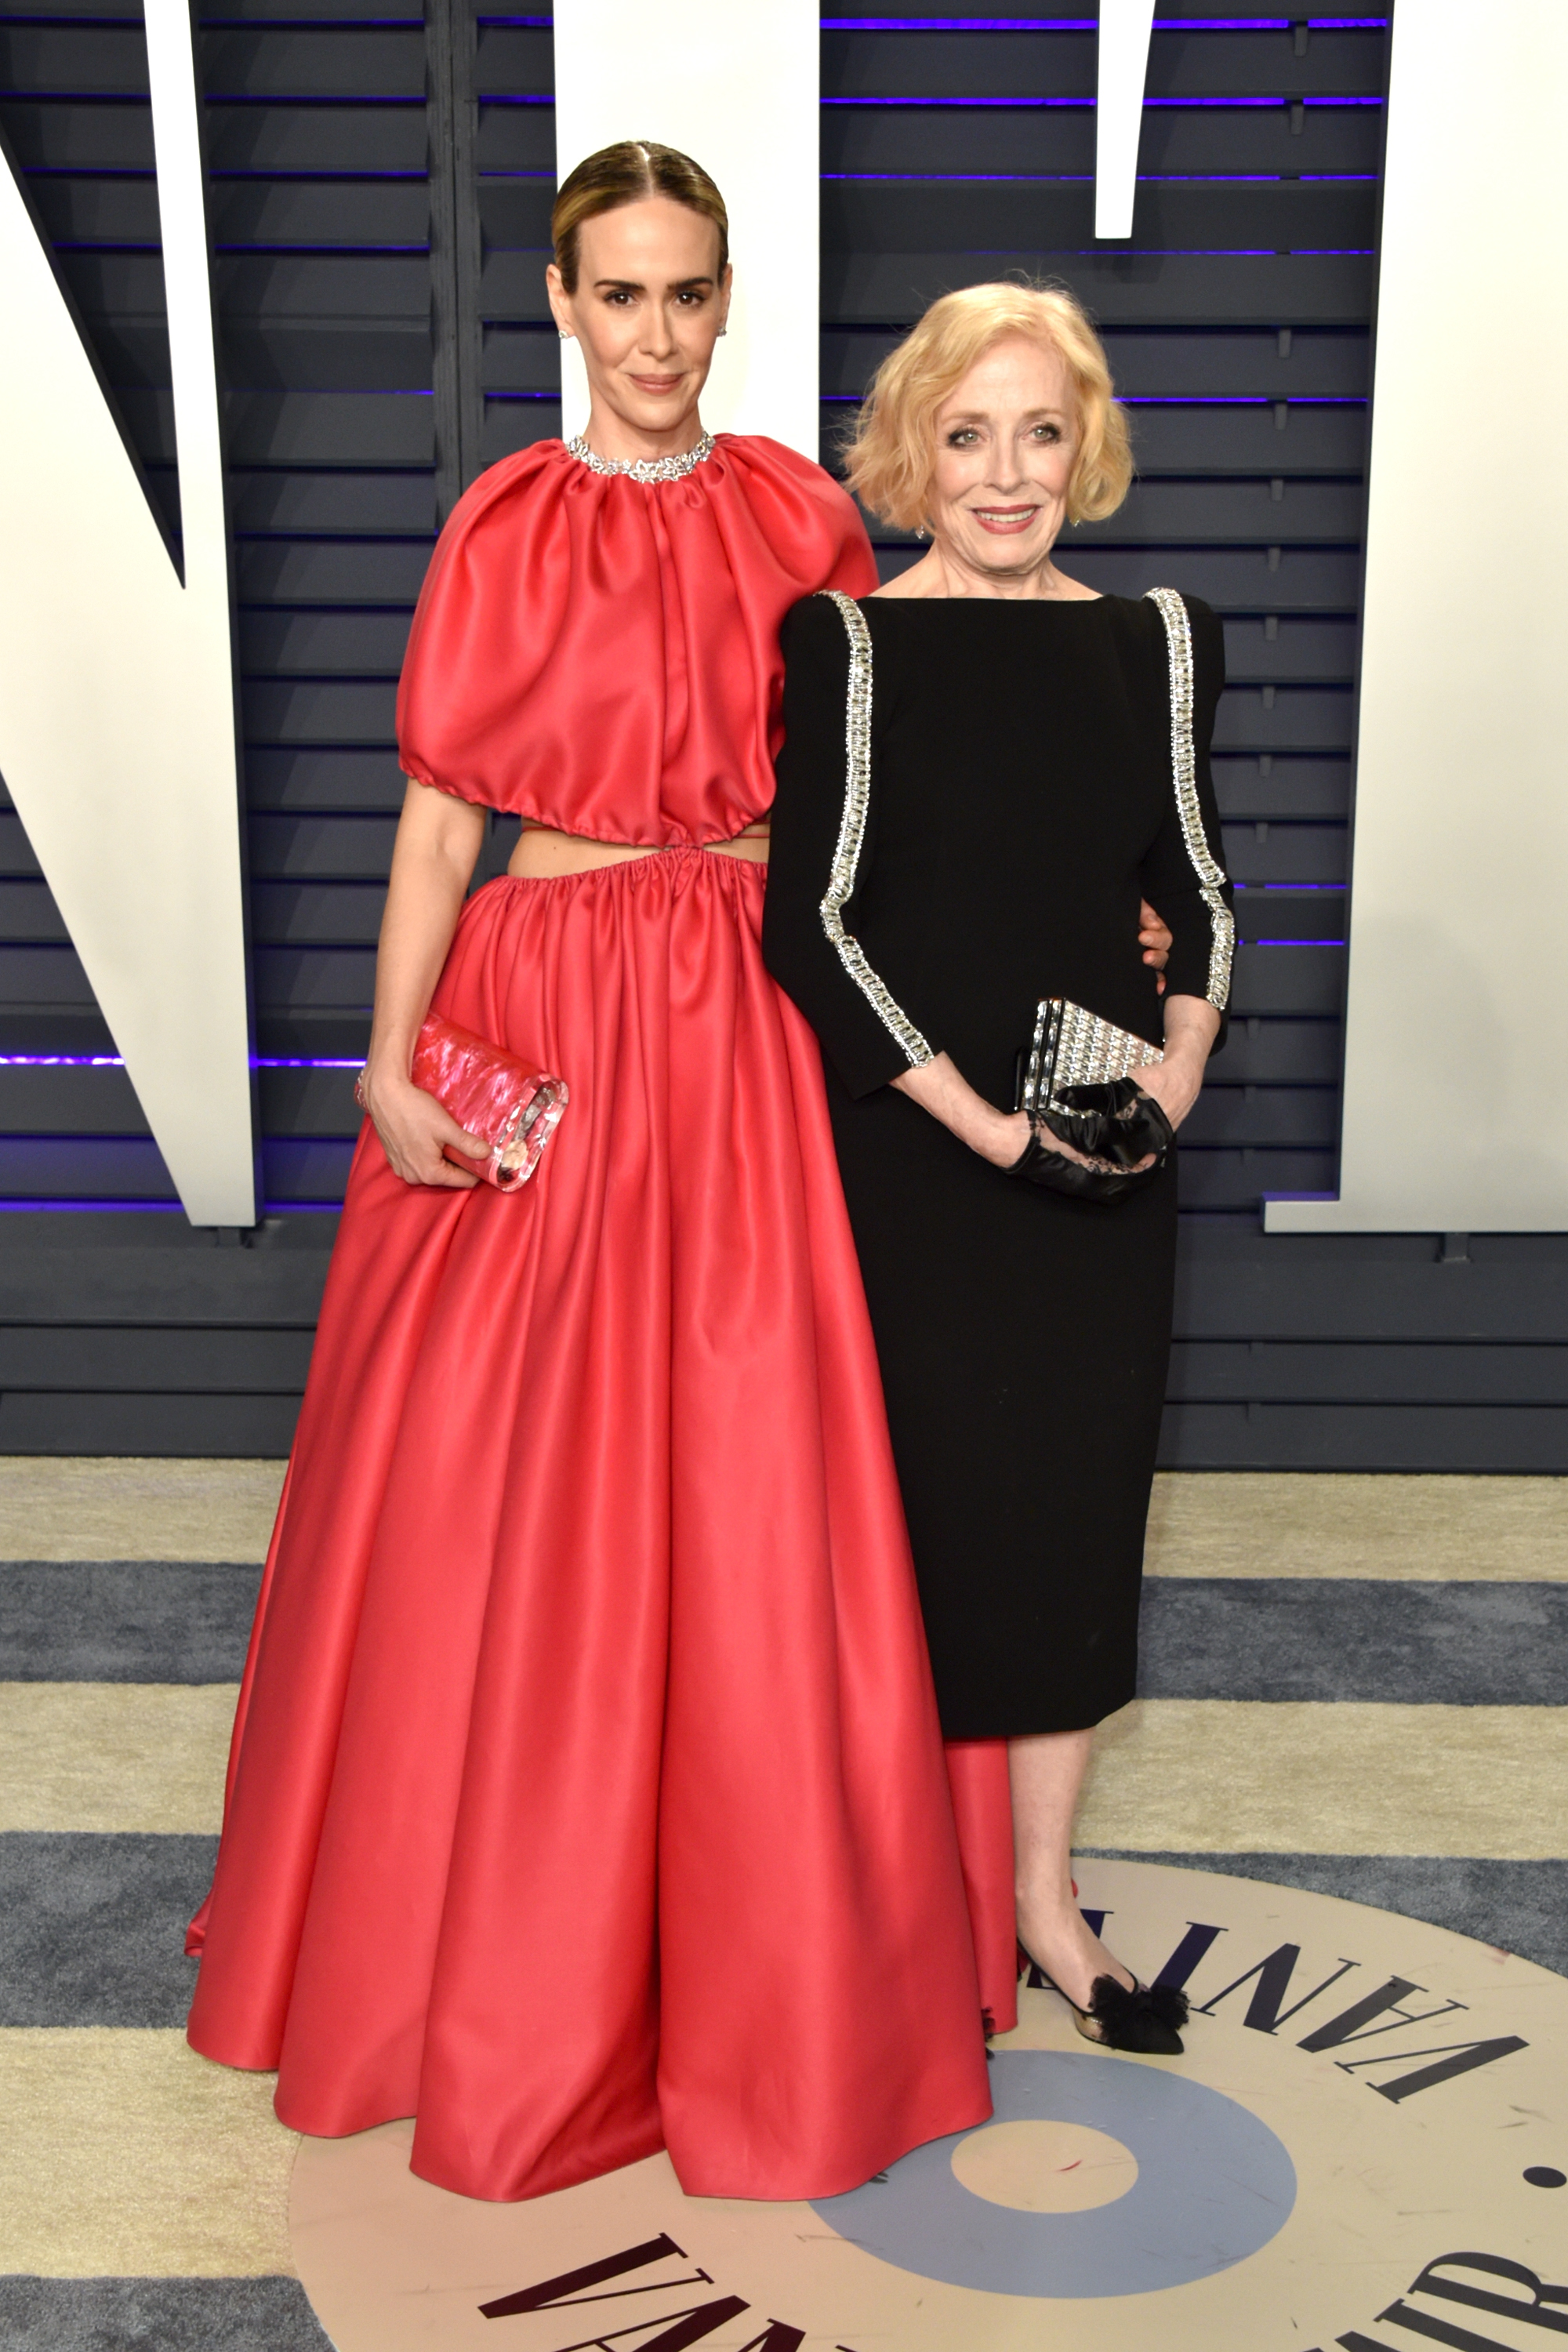 Sarah Paulson and Holland Taylor attend the 2019 Vanity Fair Oscar Party at Wallis Annenberg Center for the Performing Arts on February 24, 2019 in Beverly Hills, California. | Source: Getty Images